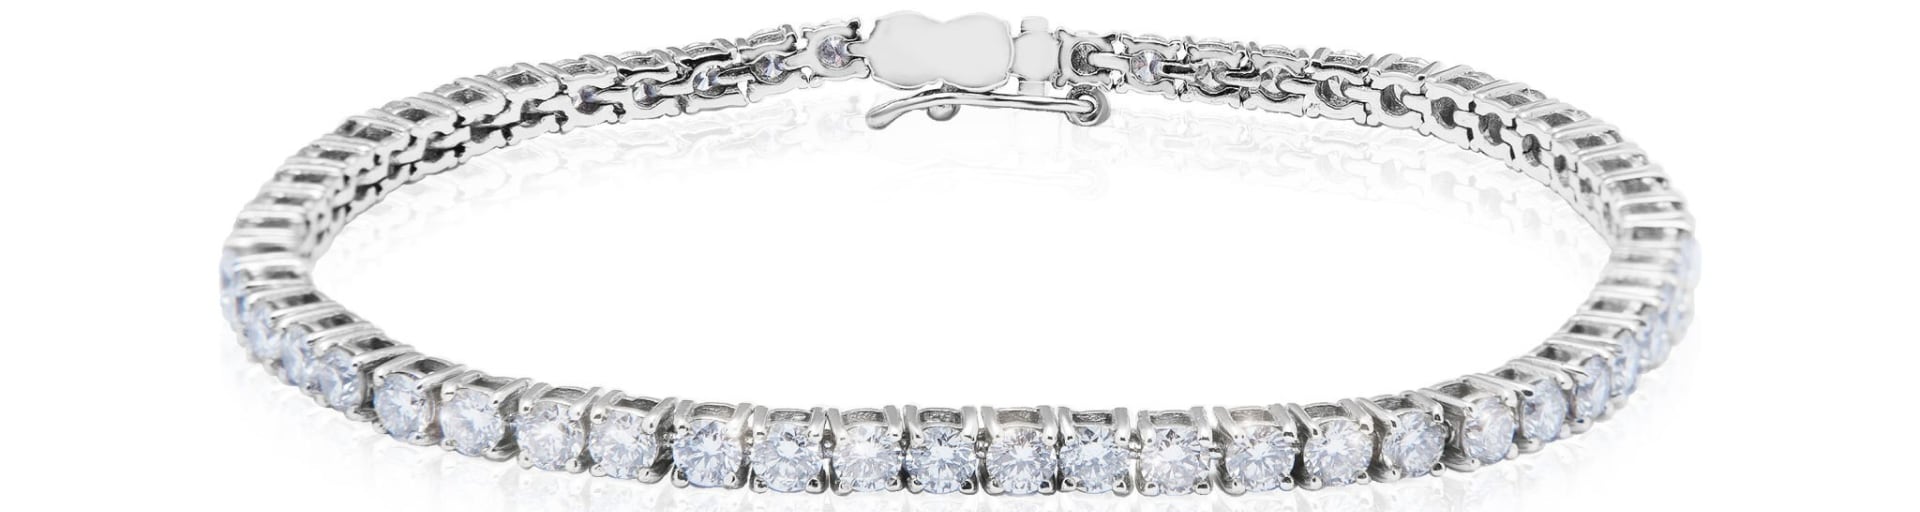 How Much is a Tennis Bracelet?